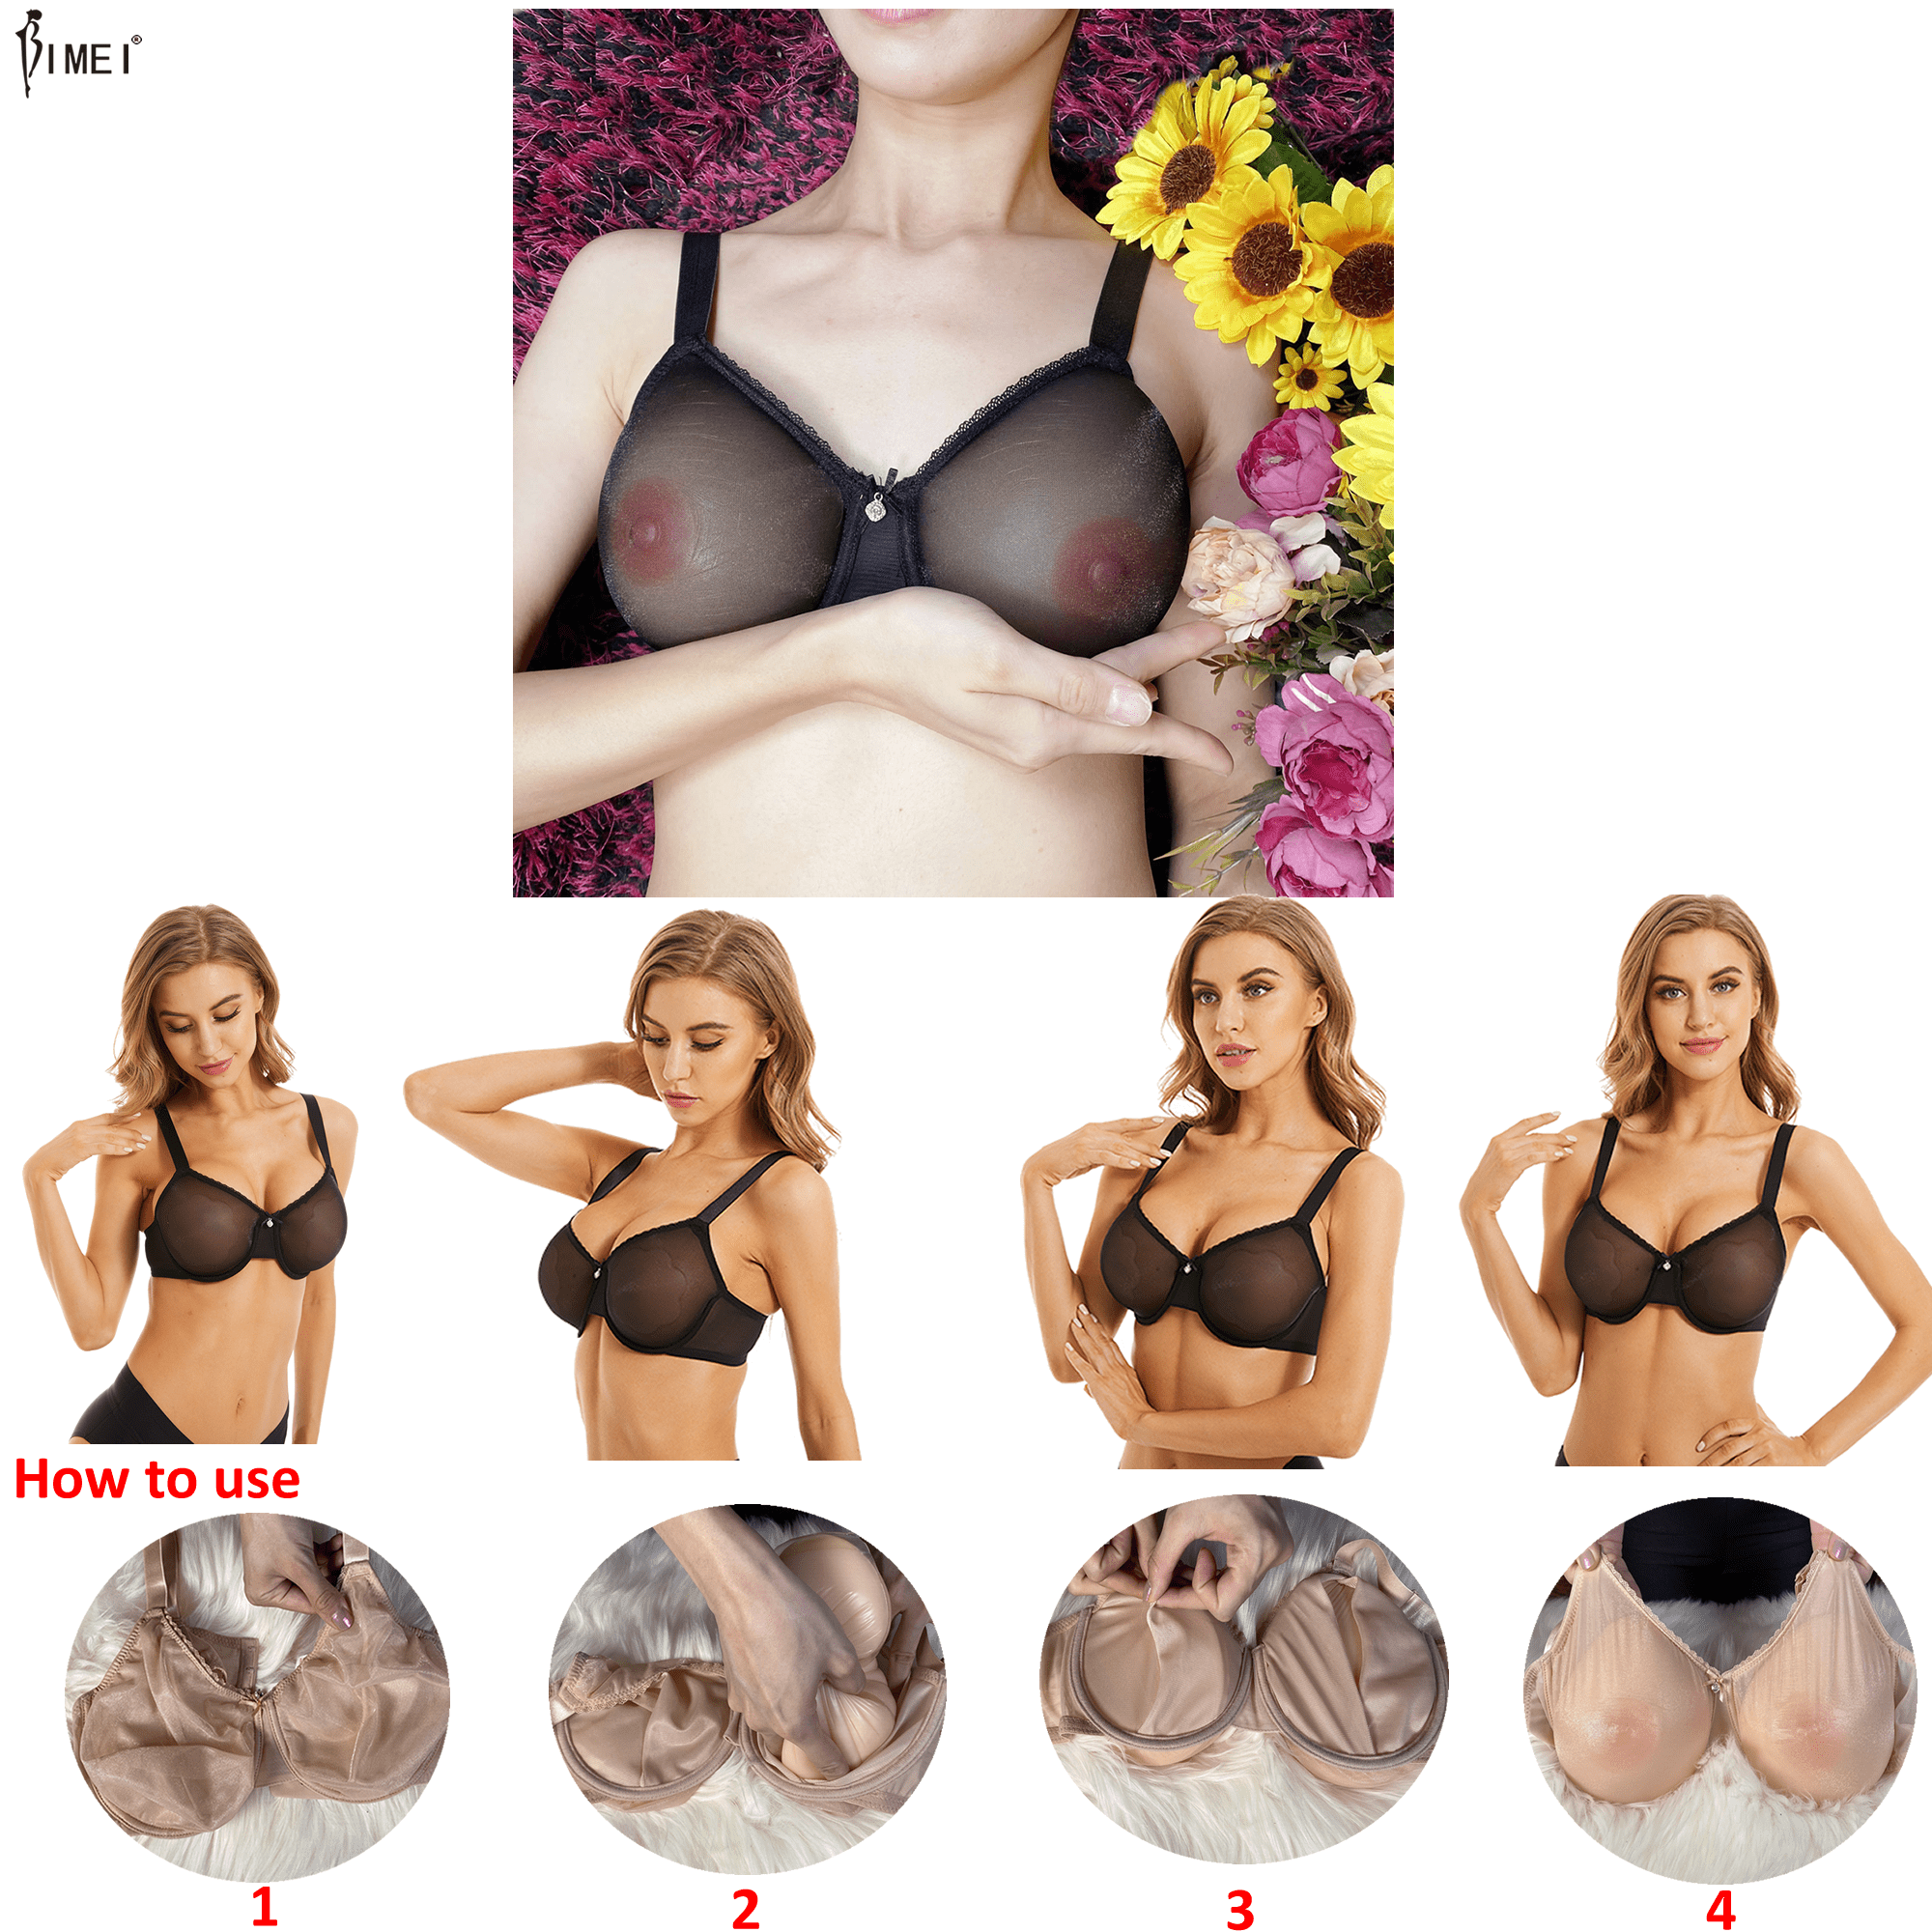 BIMEI See-Thru Pocket Bra with Underwire for Silicone Breastforms  Crossdress Pocketed Back Holds Breast Forms